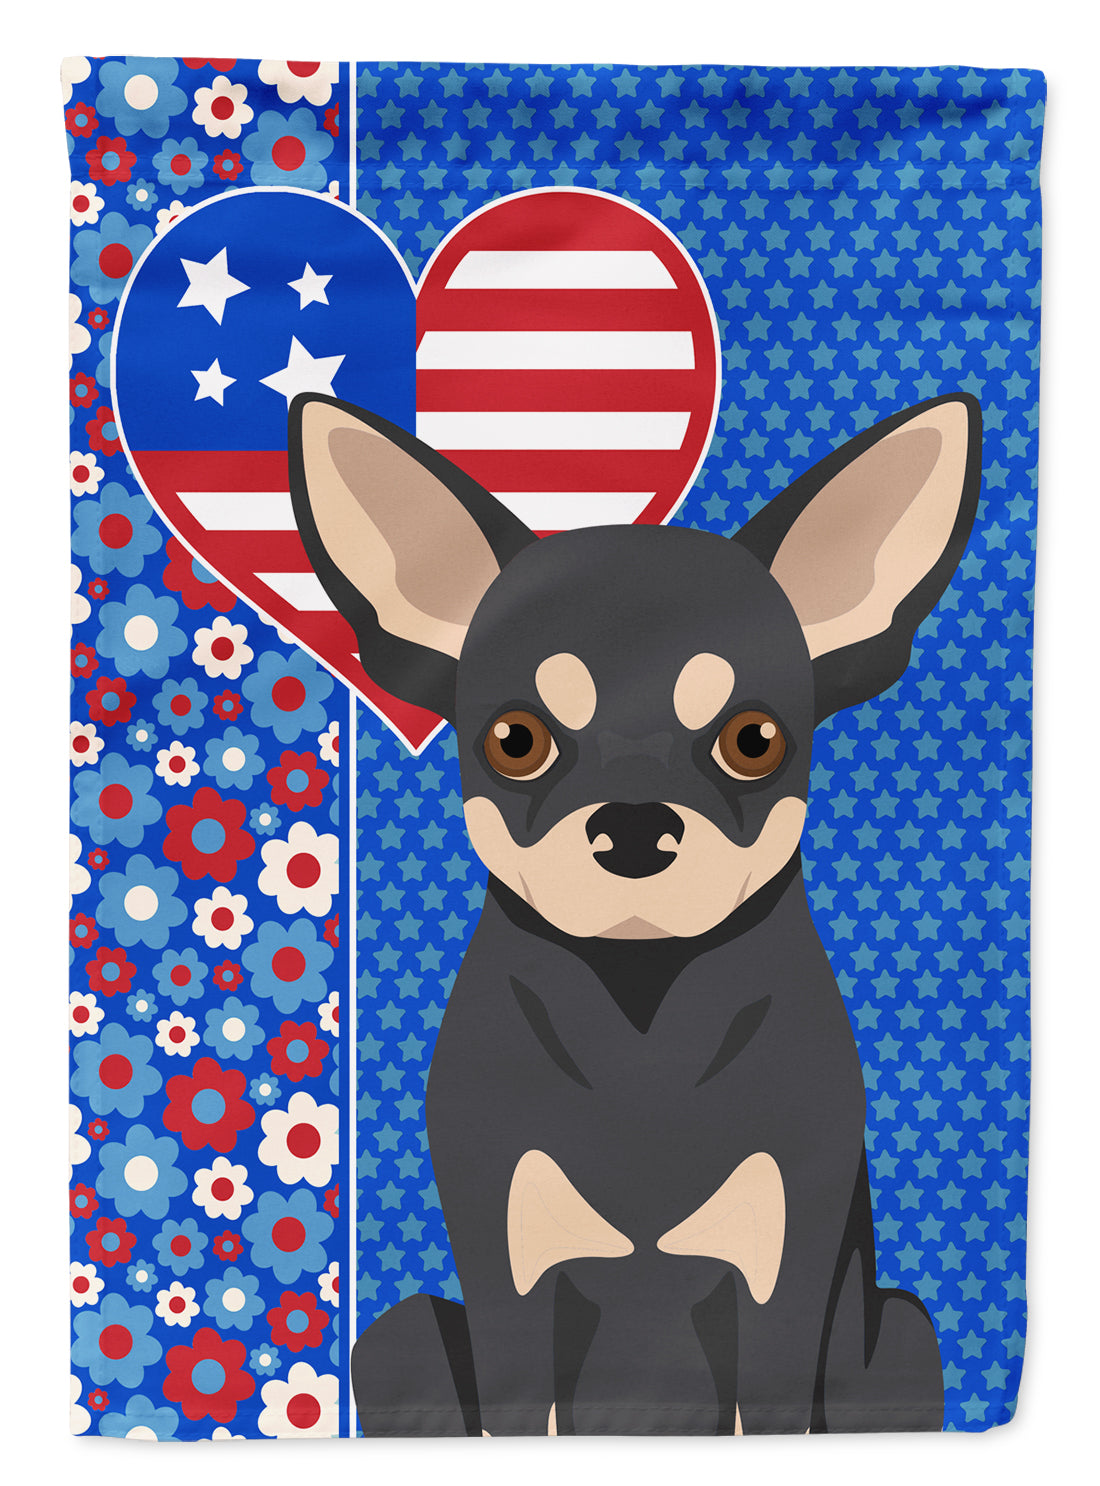 Black and Cream Chihuahua USA American Flag Garden Size